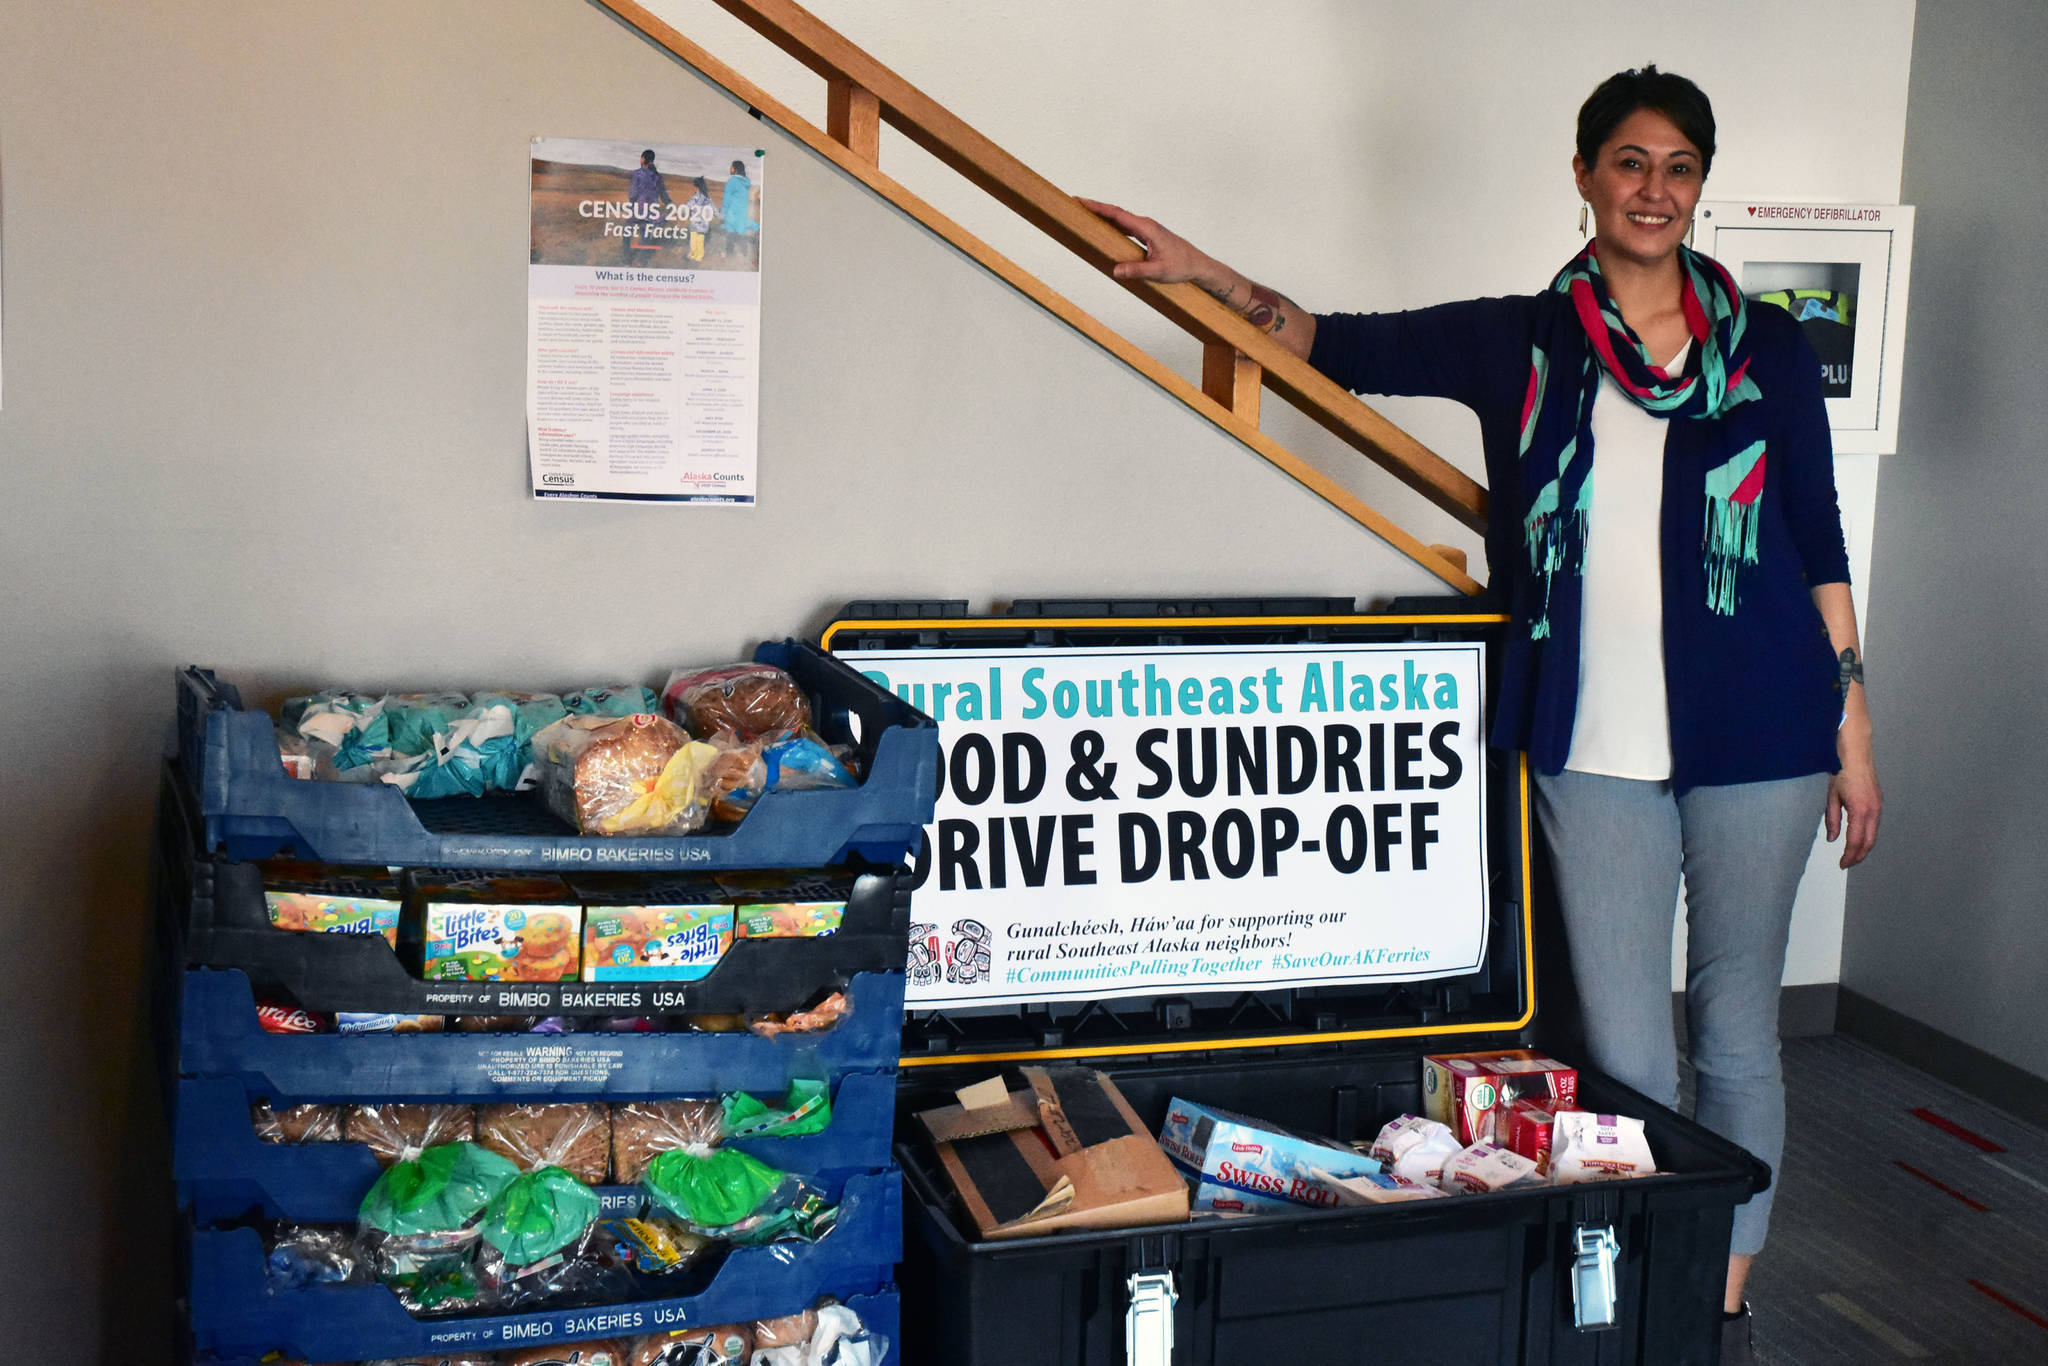 Jamiann Hasselquist, administrative assistant at Central Council of Tlingit and Haida Indian Tribes of Alaska next to food donation bins for rural communities in Southeast Alaska affected by lack of ferry service on Thursday, Feb. 27, 2020. (Peter Segall | Juneau Empire)